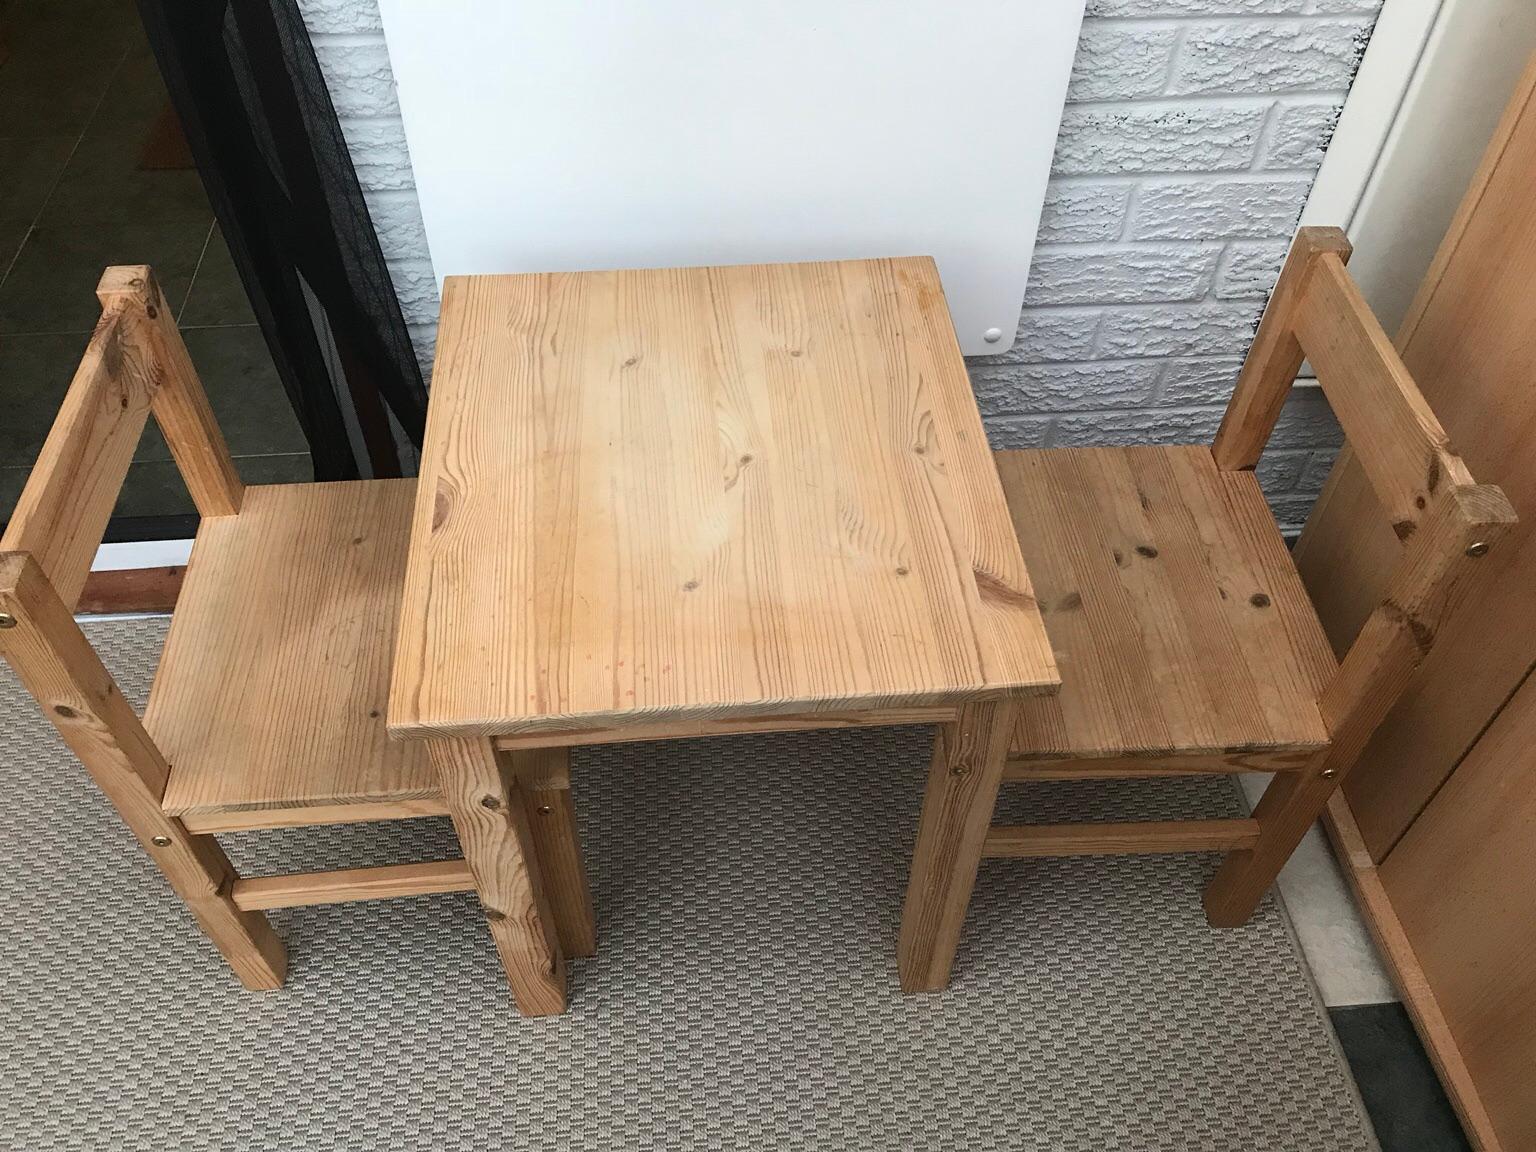 argos table and chairs for kids